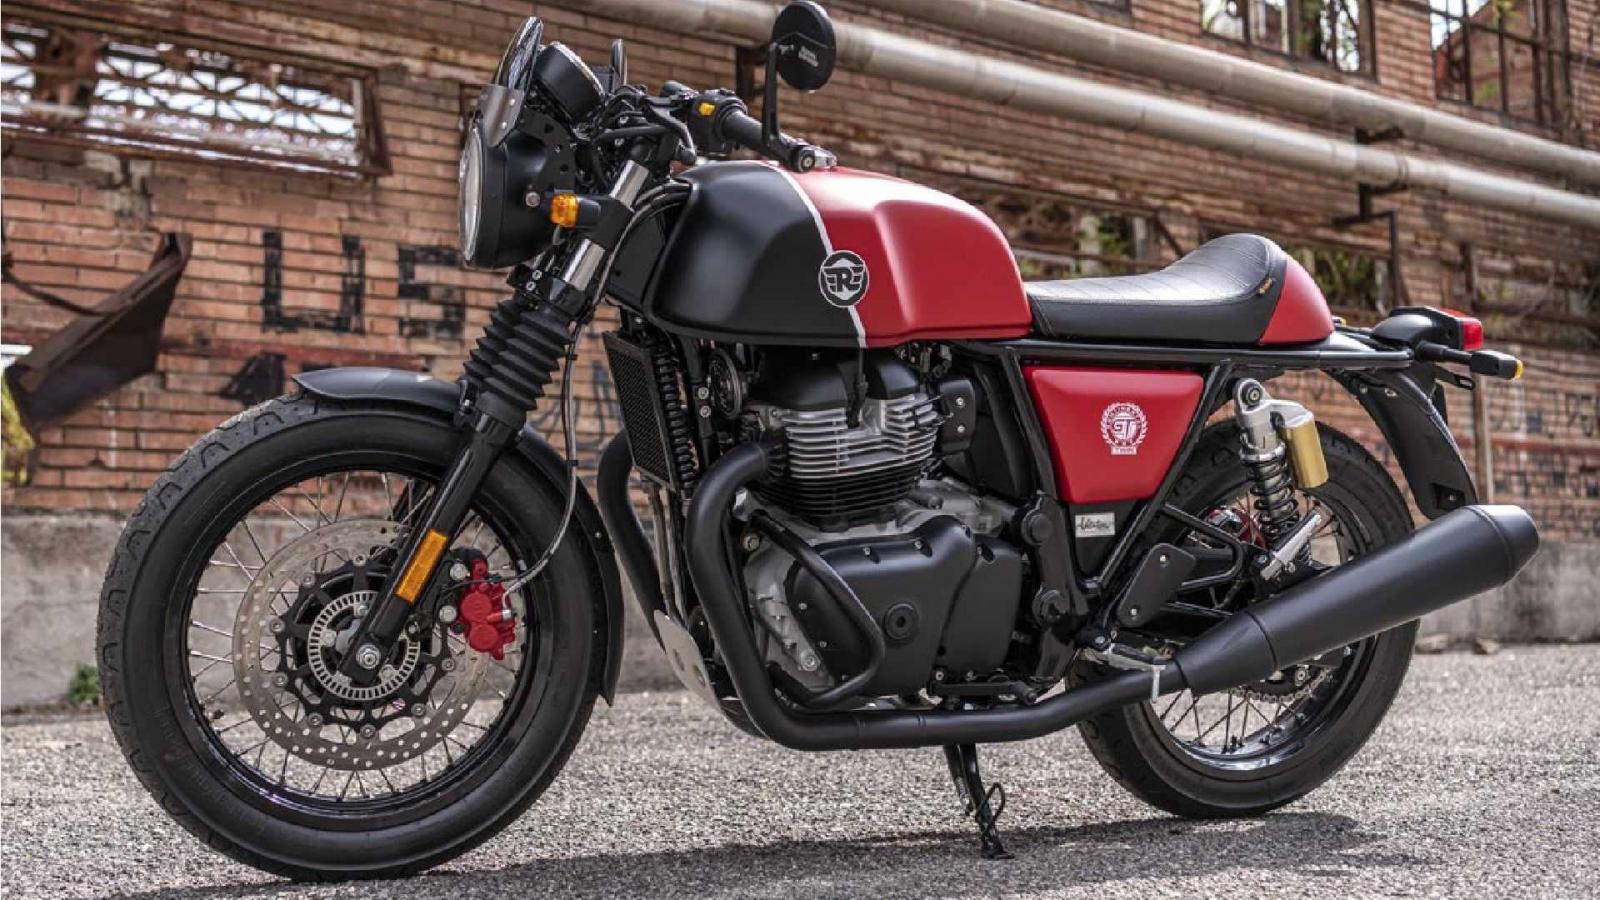 Limited Edition models of Royal Enfield 650 Twins introduced in Italy